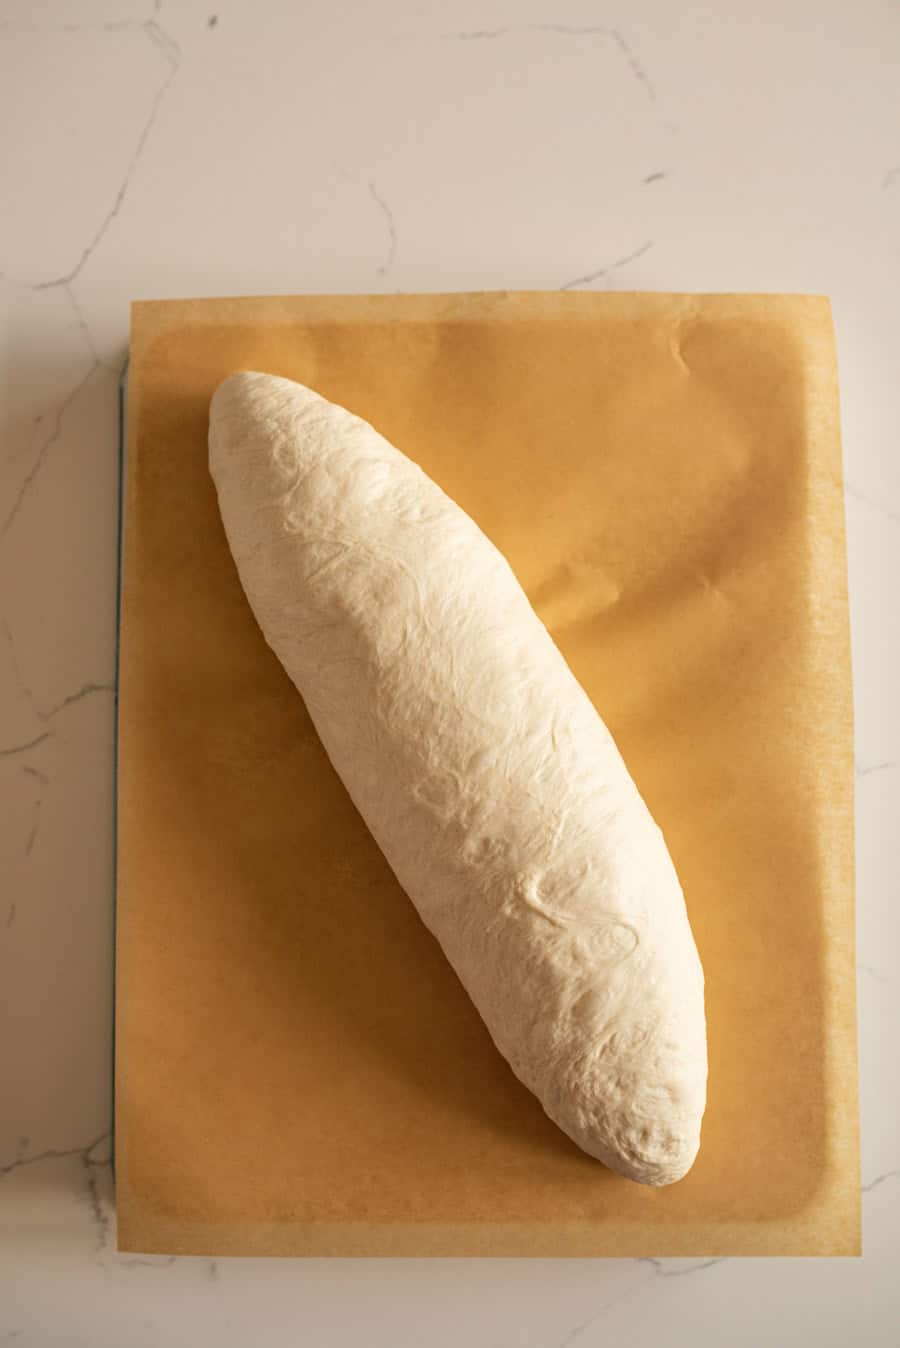 Italian bread dough on brown parchment paper after being shaped into a loaf. 